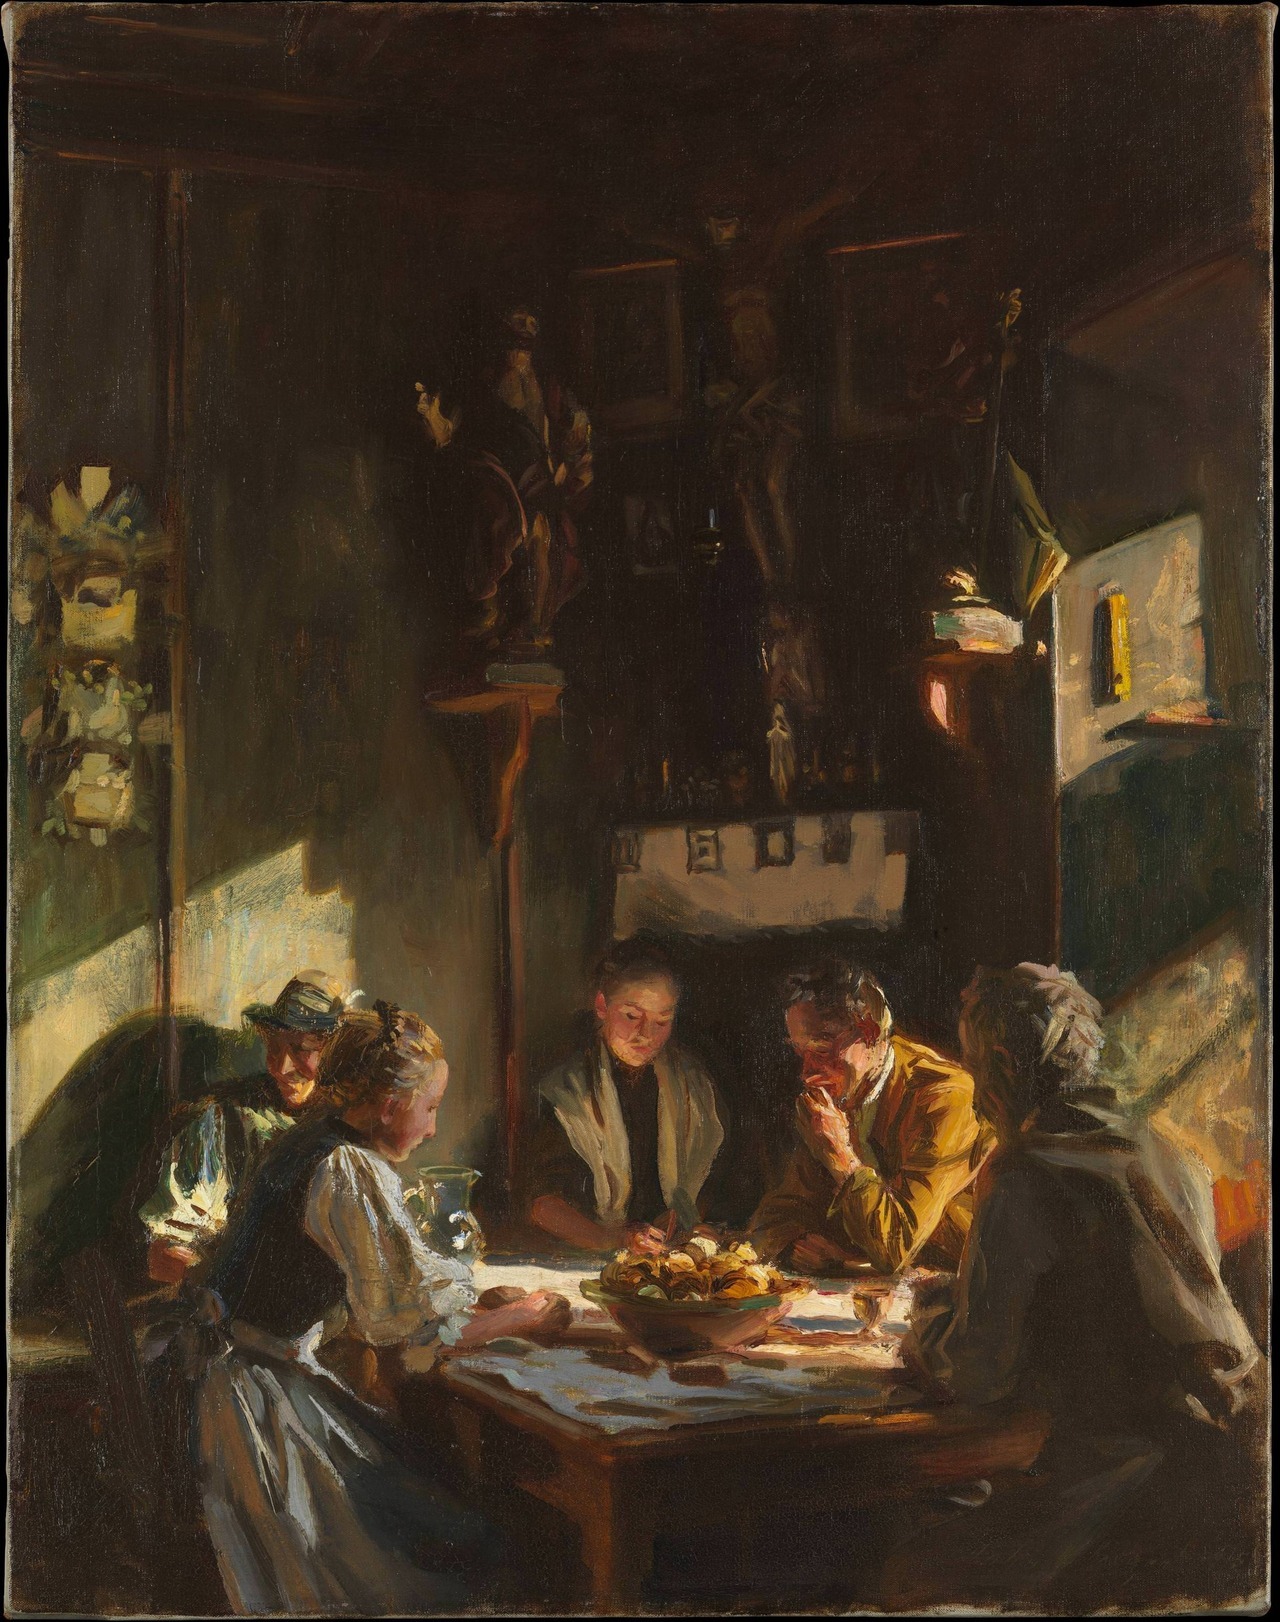 Tyrolese Interior by John Singer Sargent. Broad strokes that outline the structure of the face make the subjects recognizable without much detail.